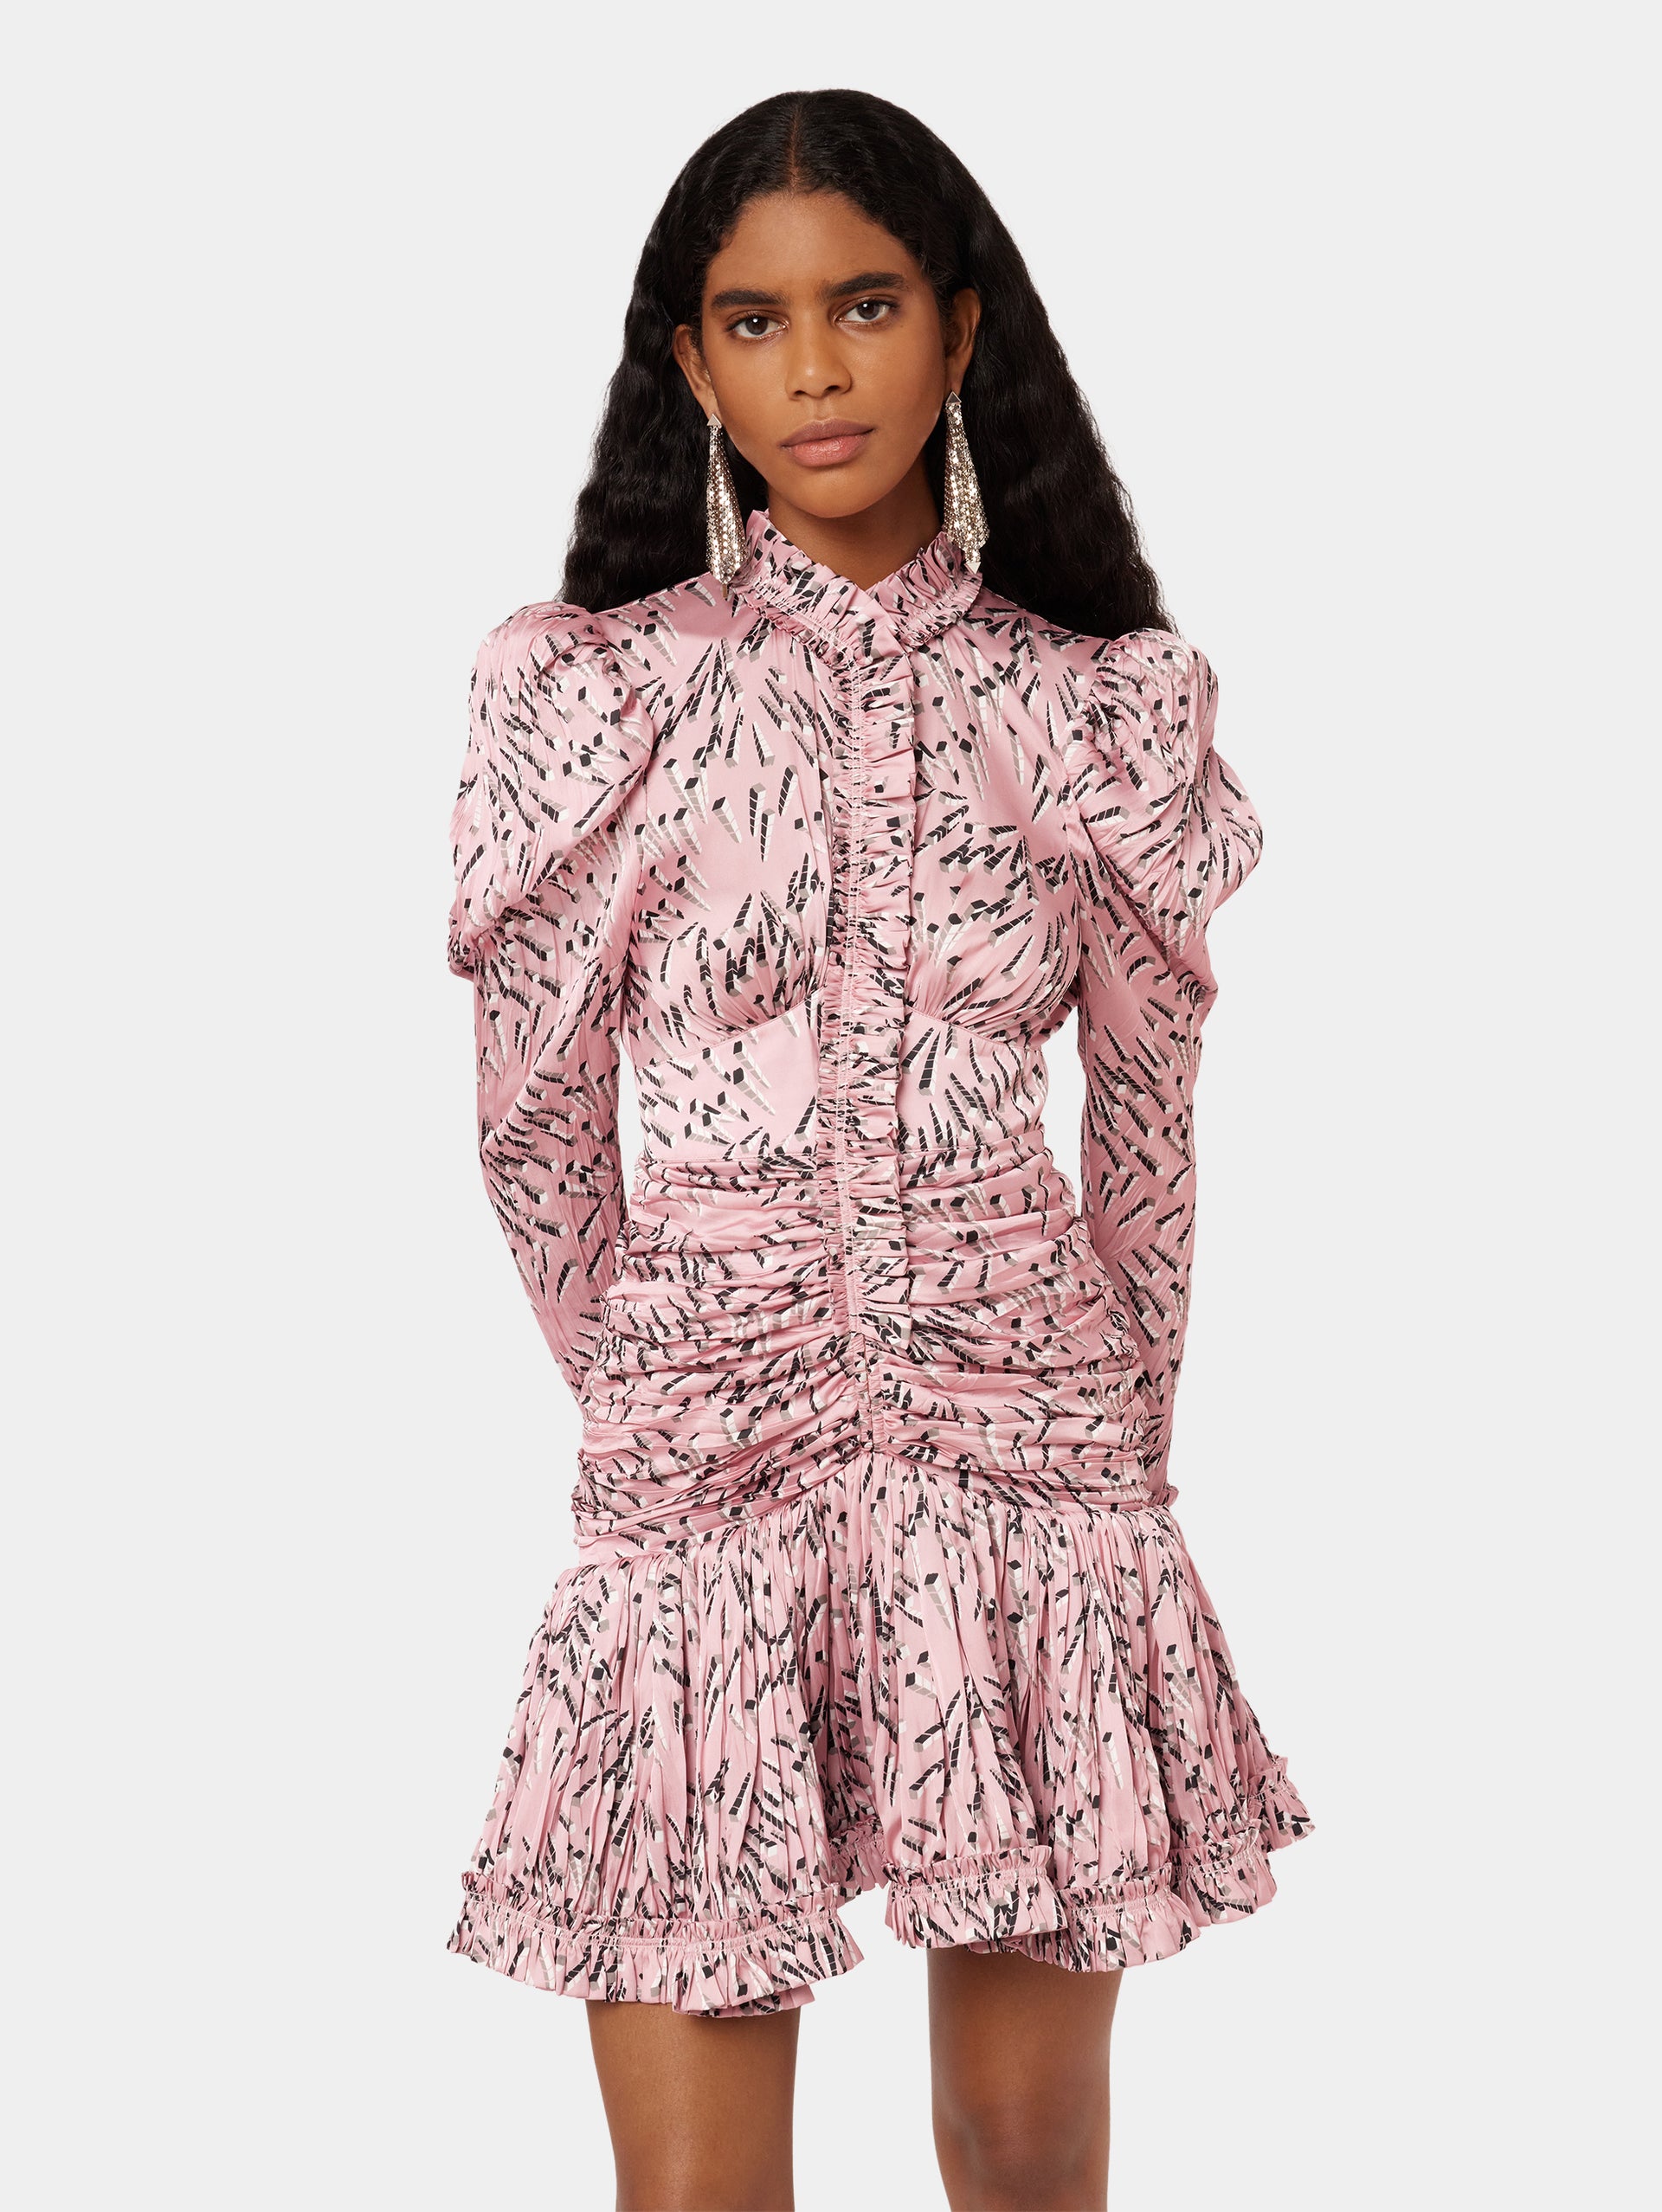 Pleated Pink Dress with Patterns